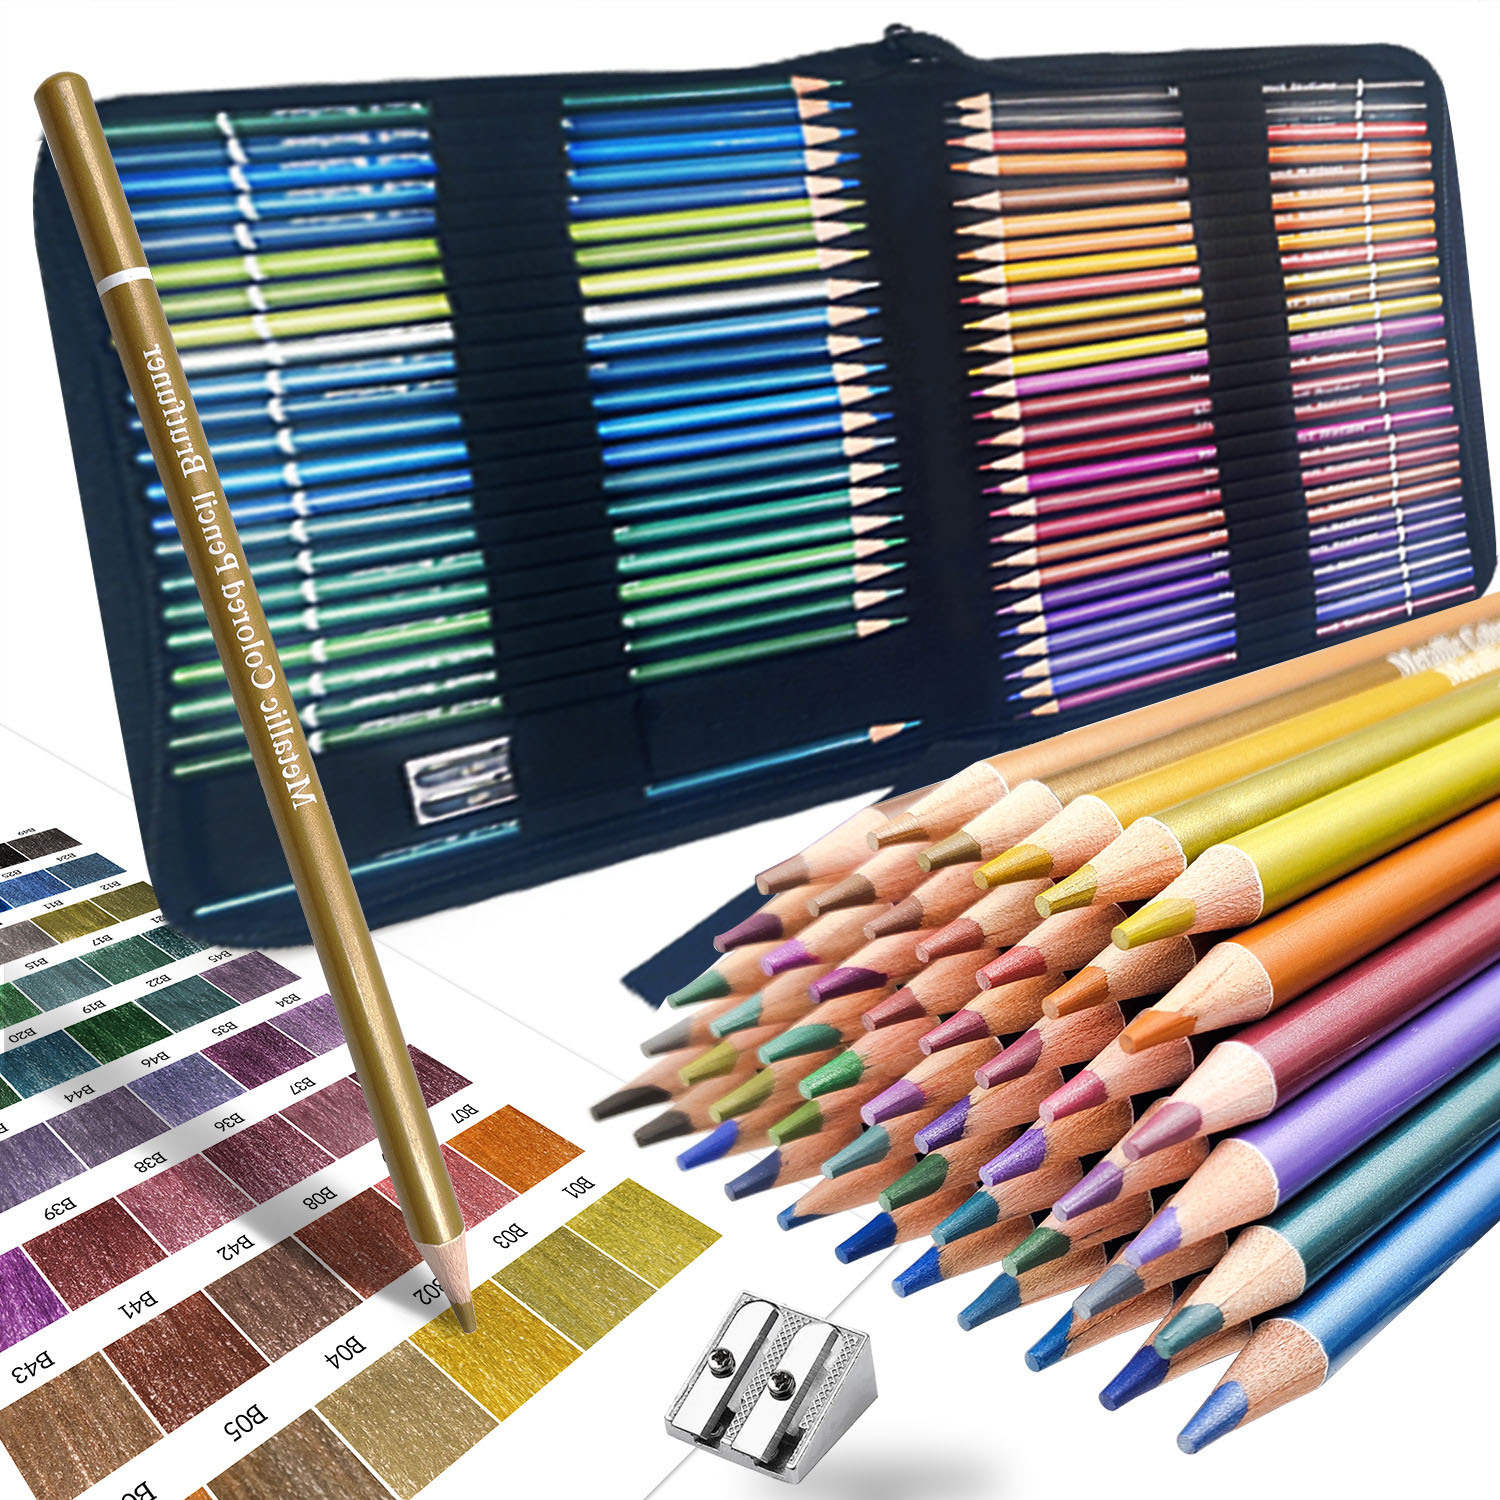 H&B Oil Colored Pencils Set 50 Color Pre-Sharpened Color Sketch Pencils Art Supplies for Students Adults Artists Drawing Sketching Coloring Books